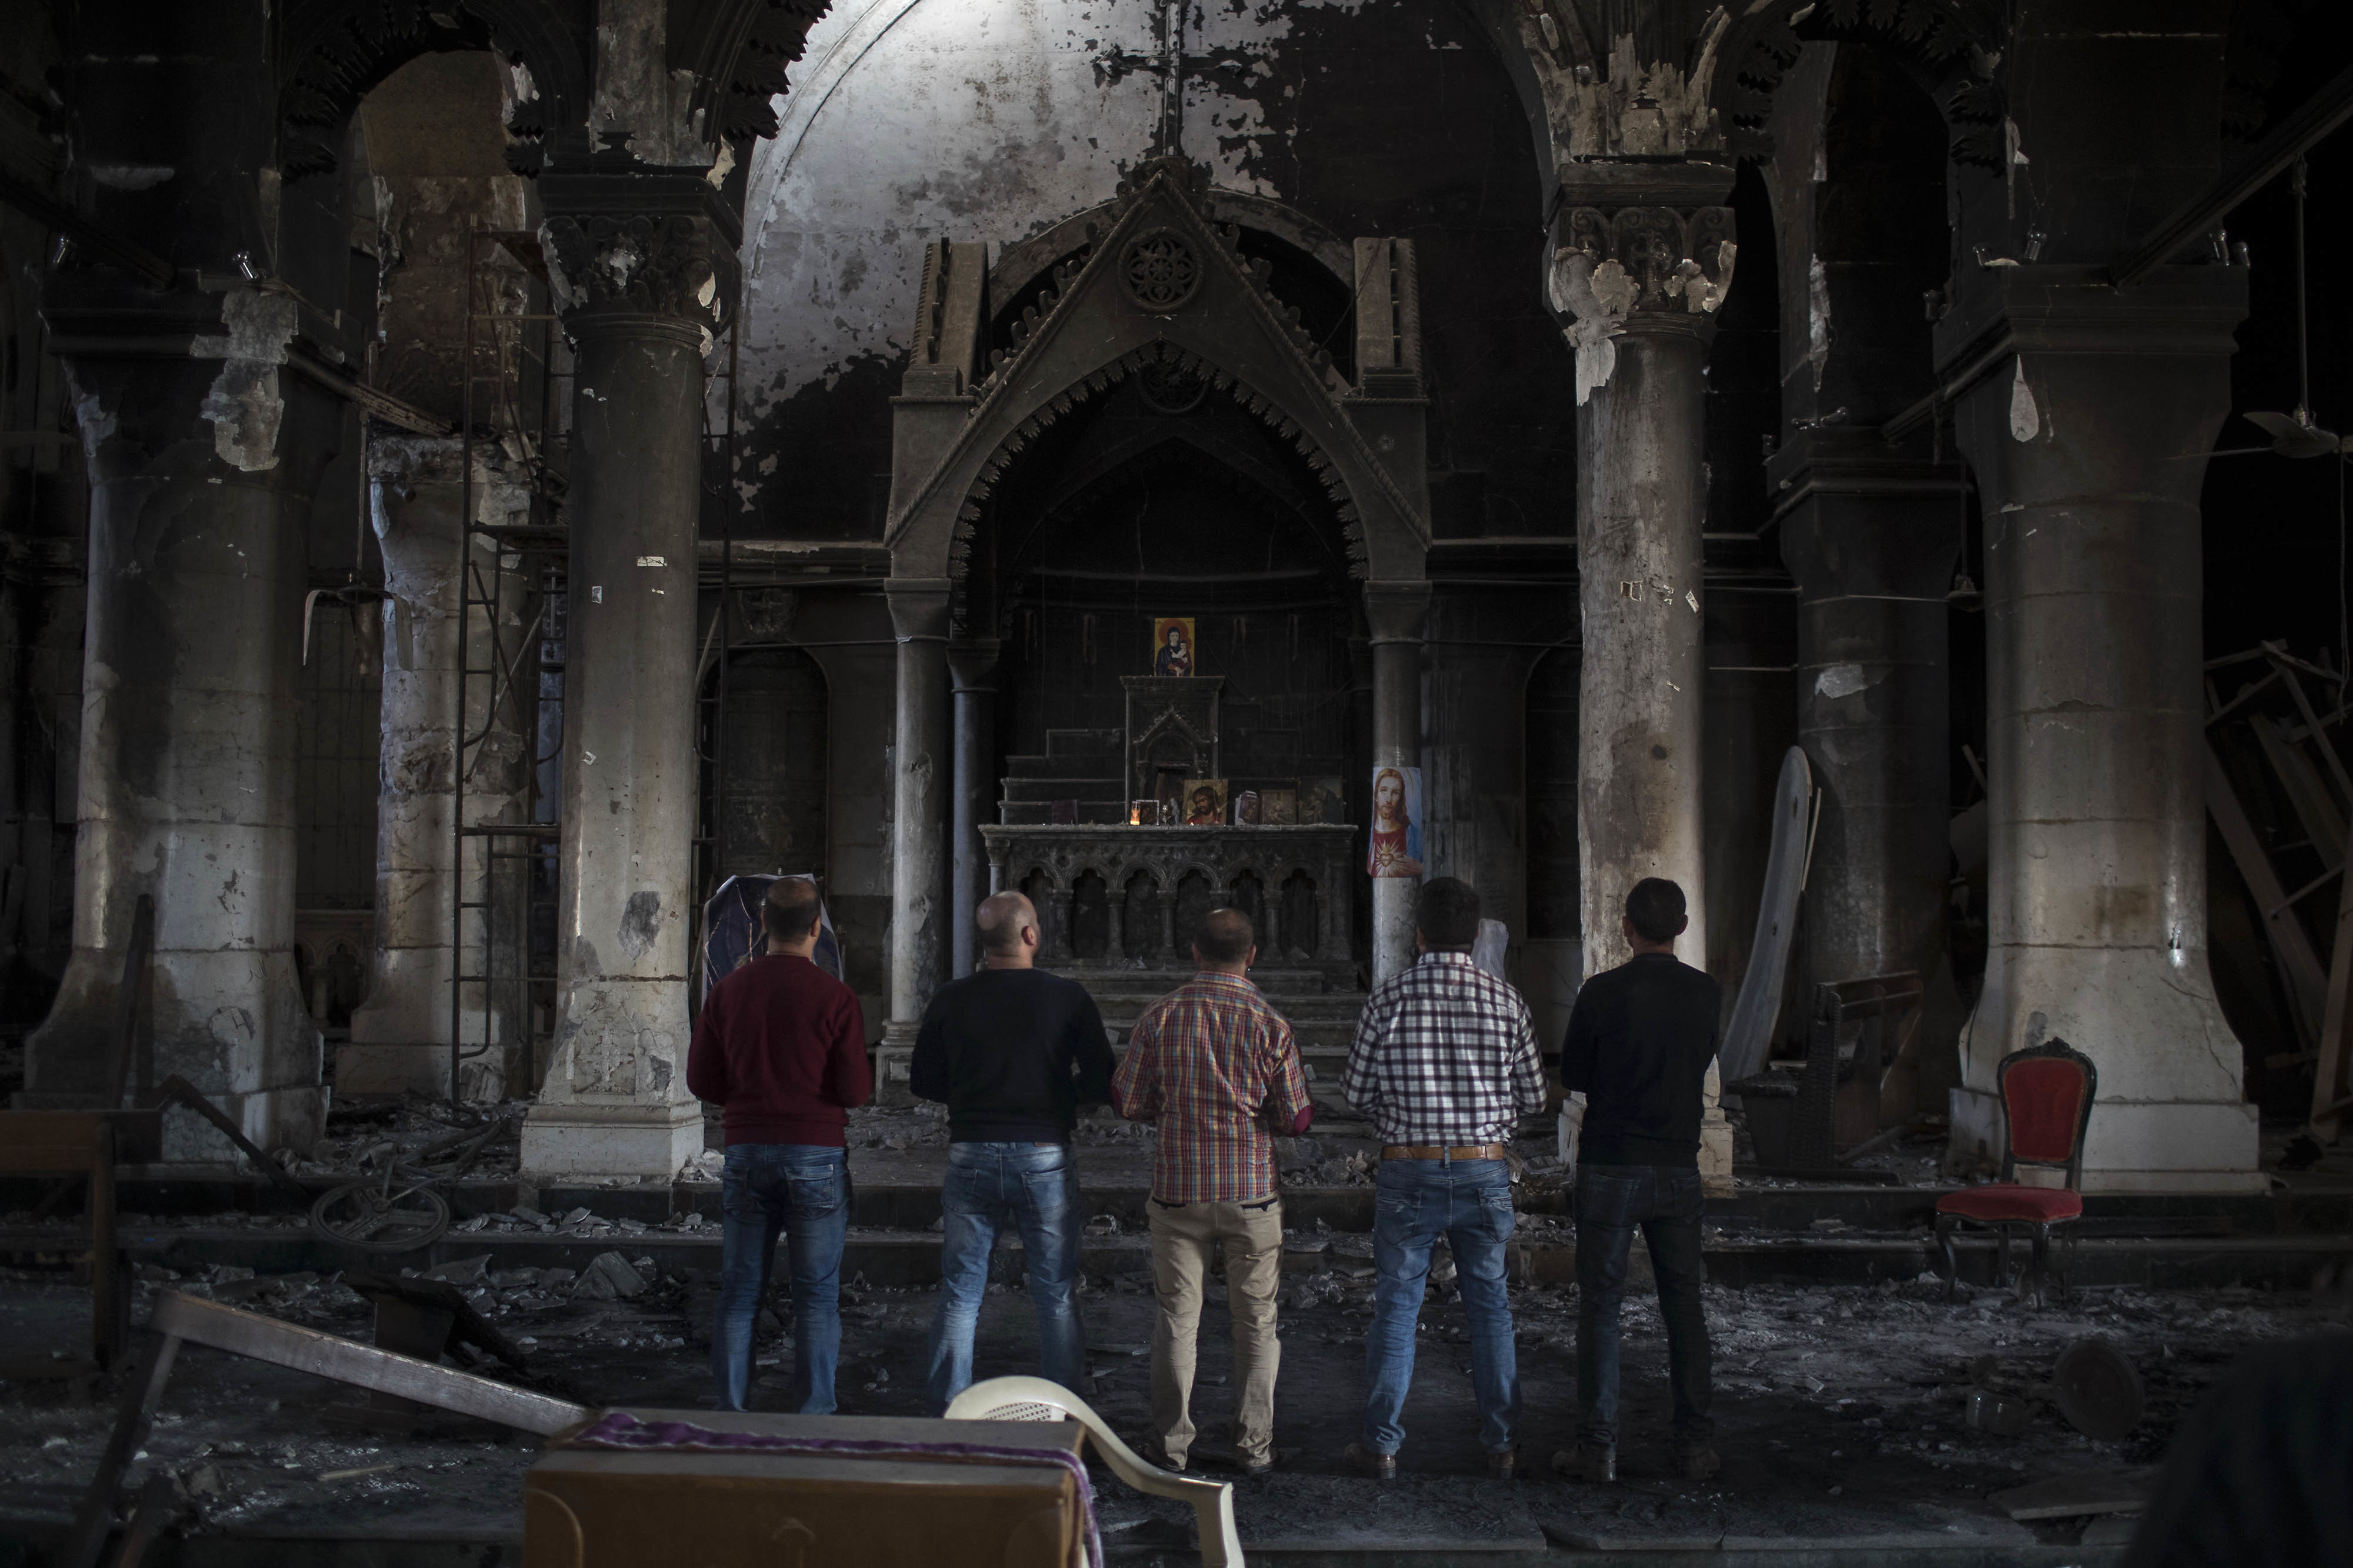 Iraqi Christians pray at the Church of the Immaculate Conception, damaged by Islamic State fighters during their occupation of Qaraqosh, east of Mosul